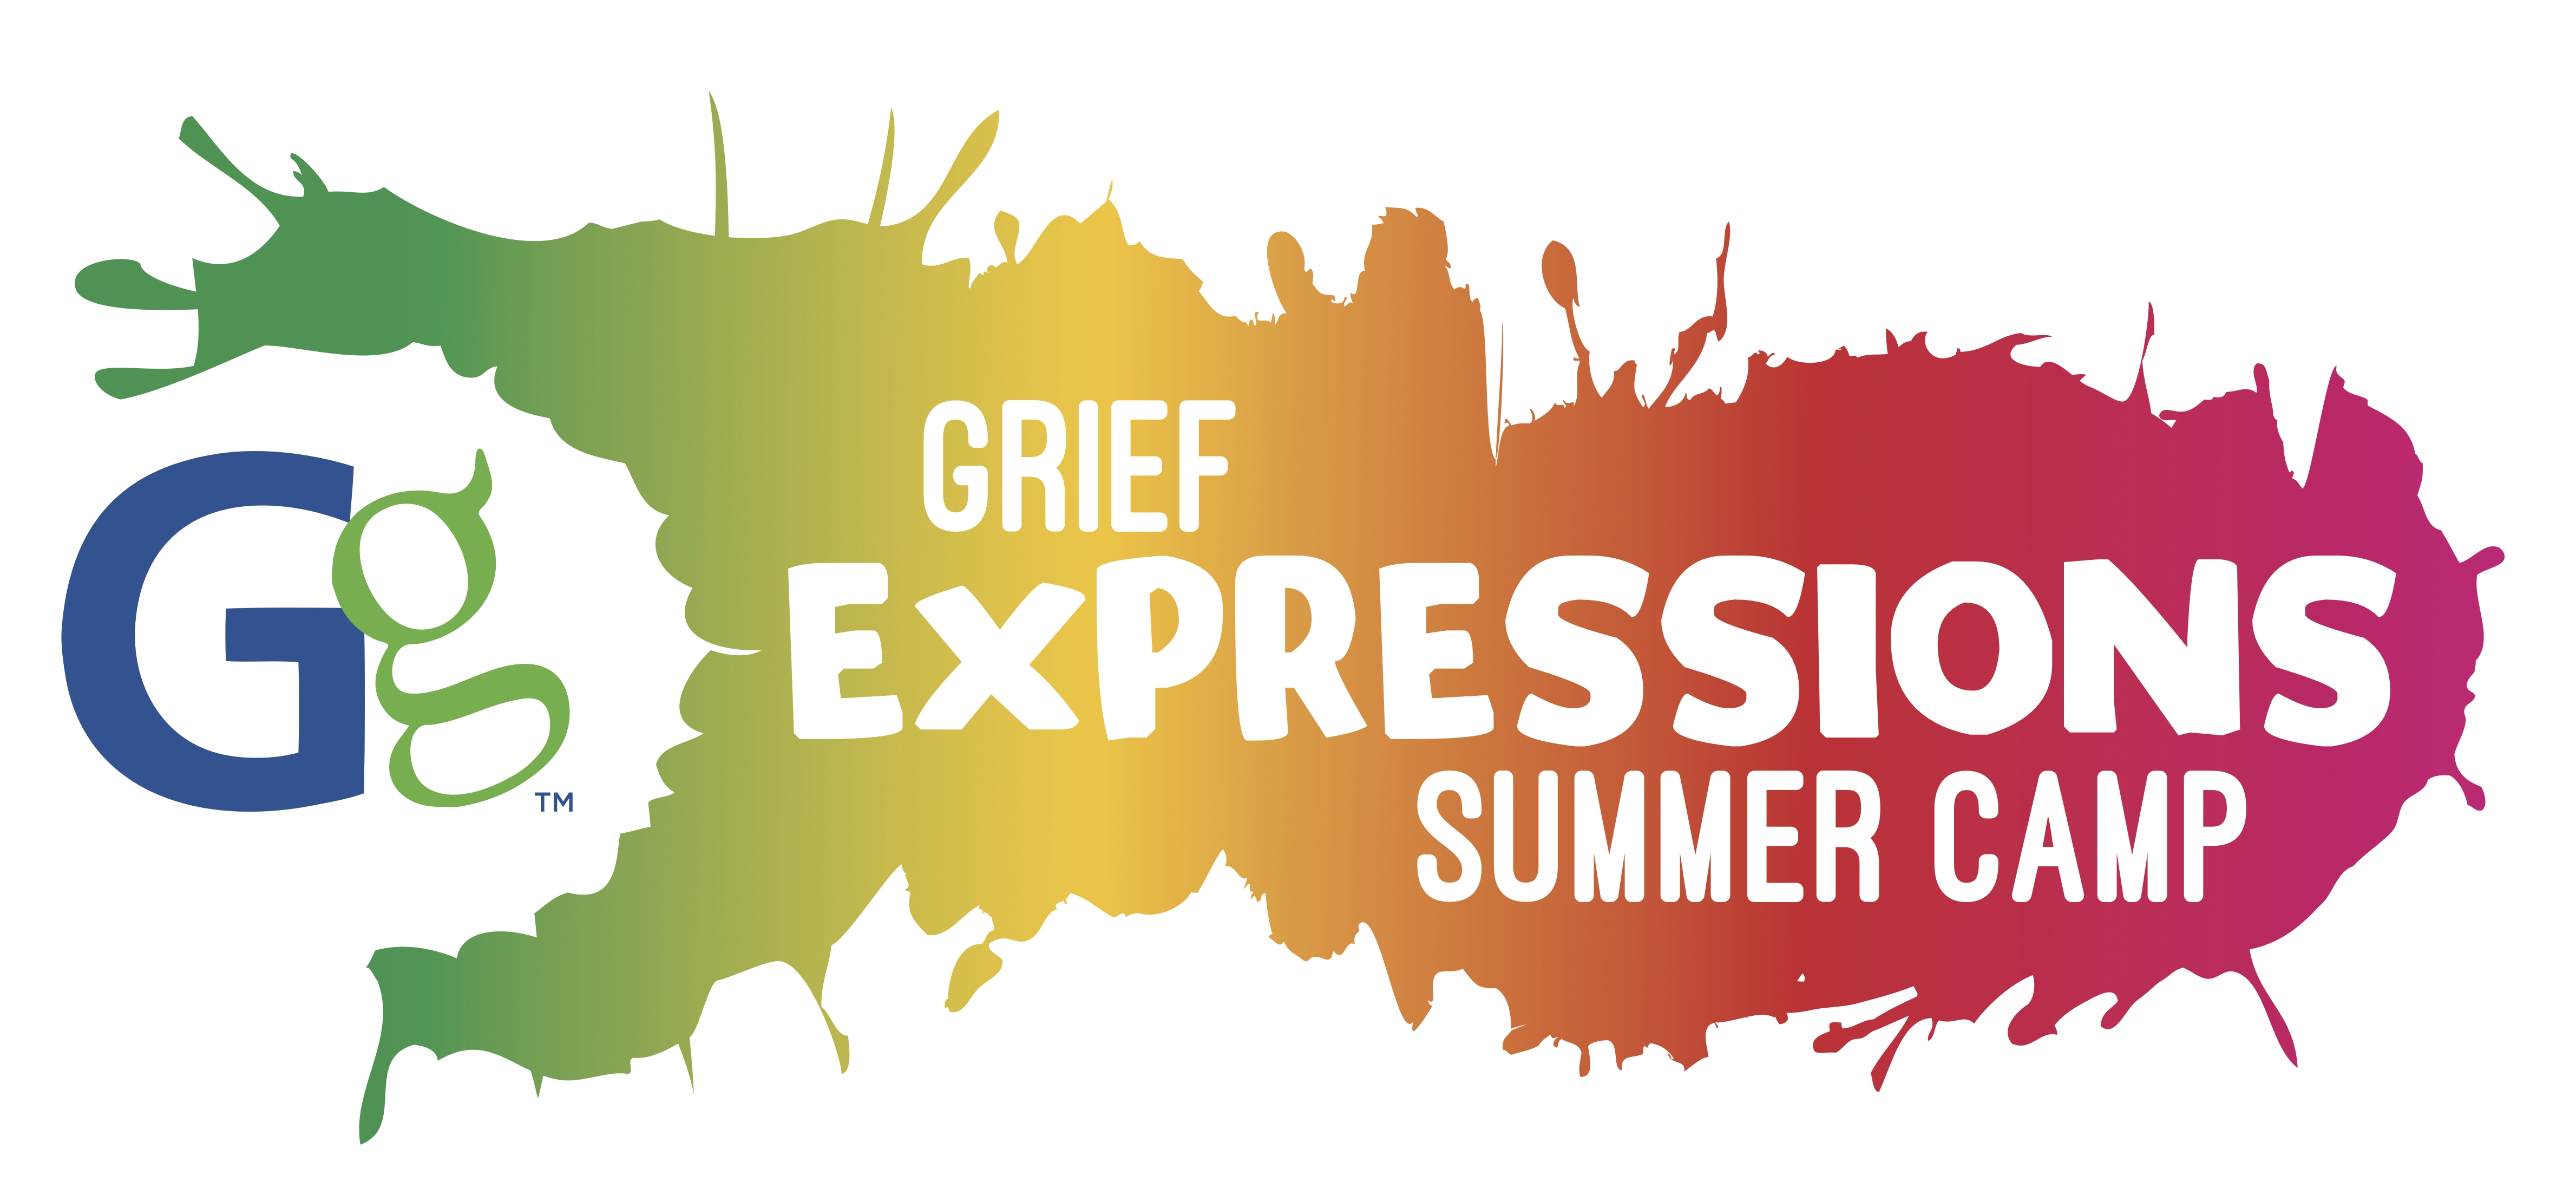 Grief Expressions Summer Camp